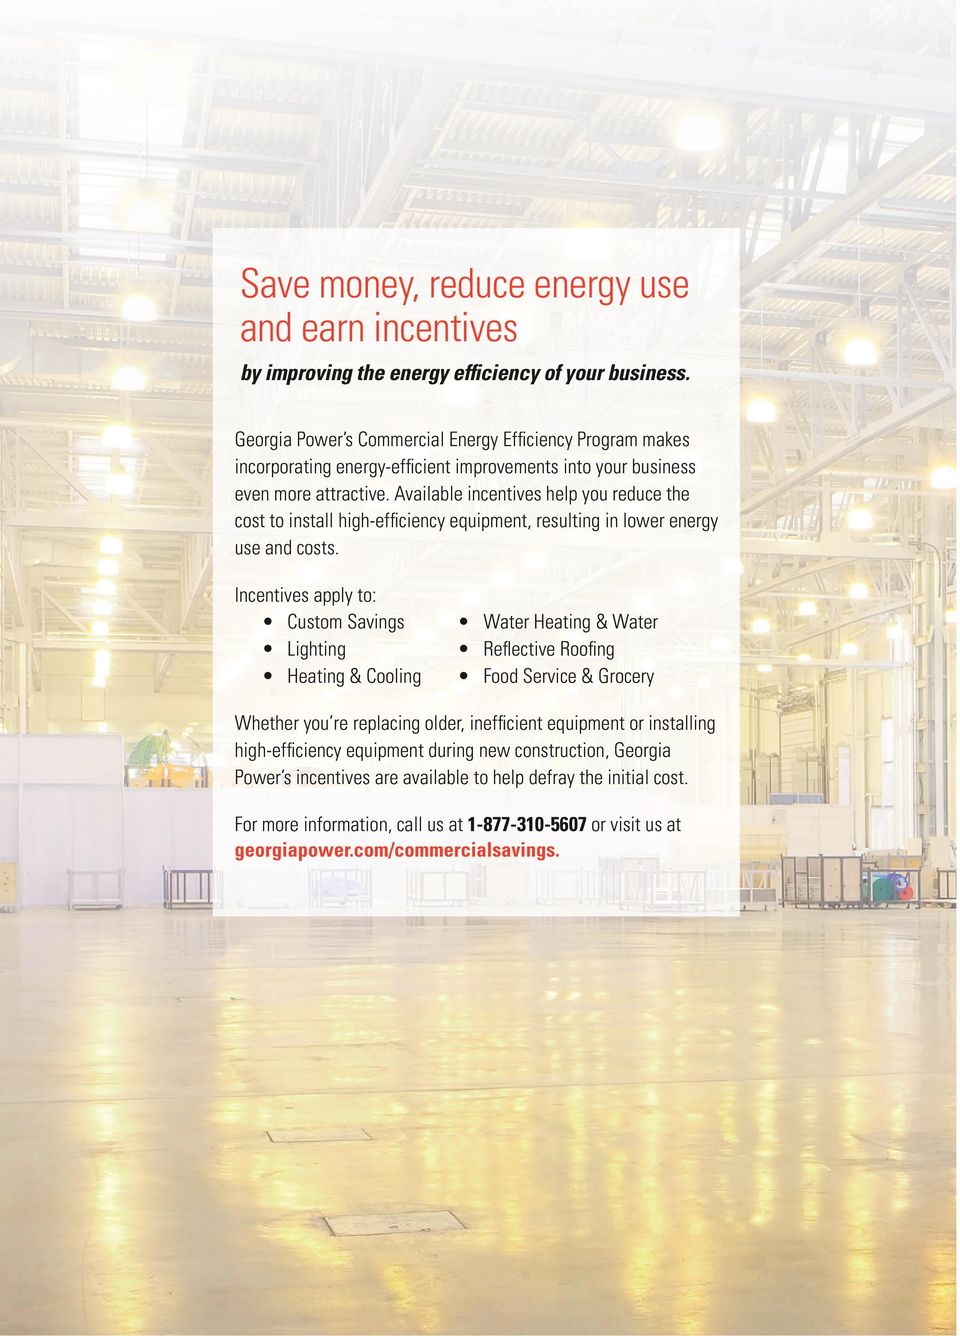 Available incentives help you reduce the cost to install high-efficiency equipment, resulting in lower energy use and costs.